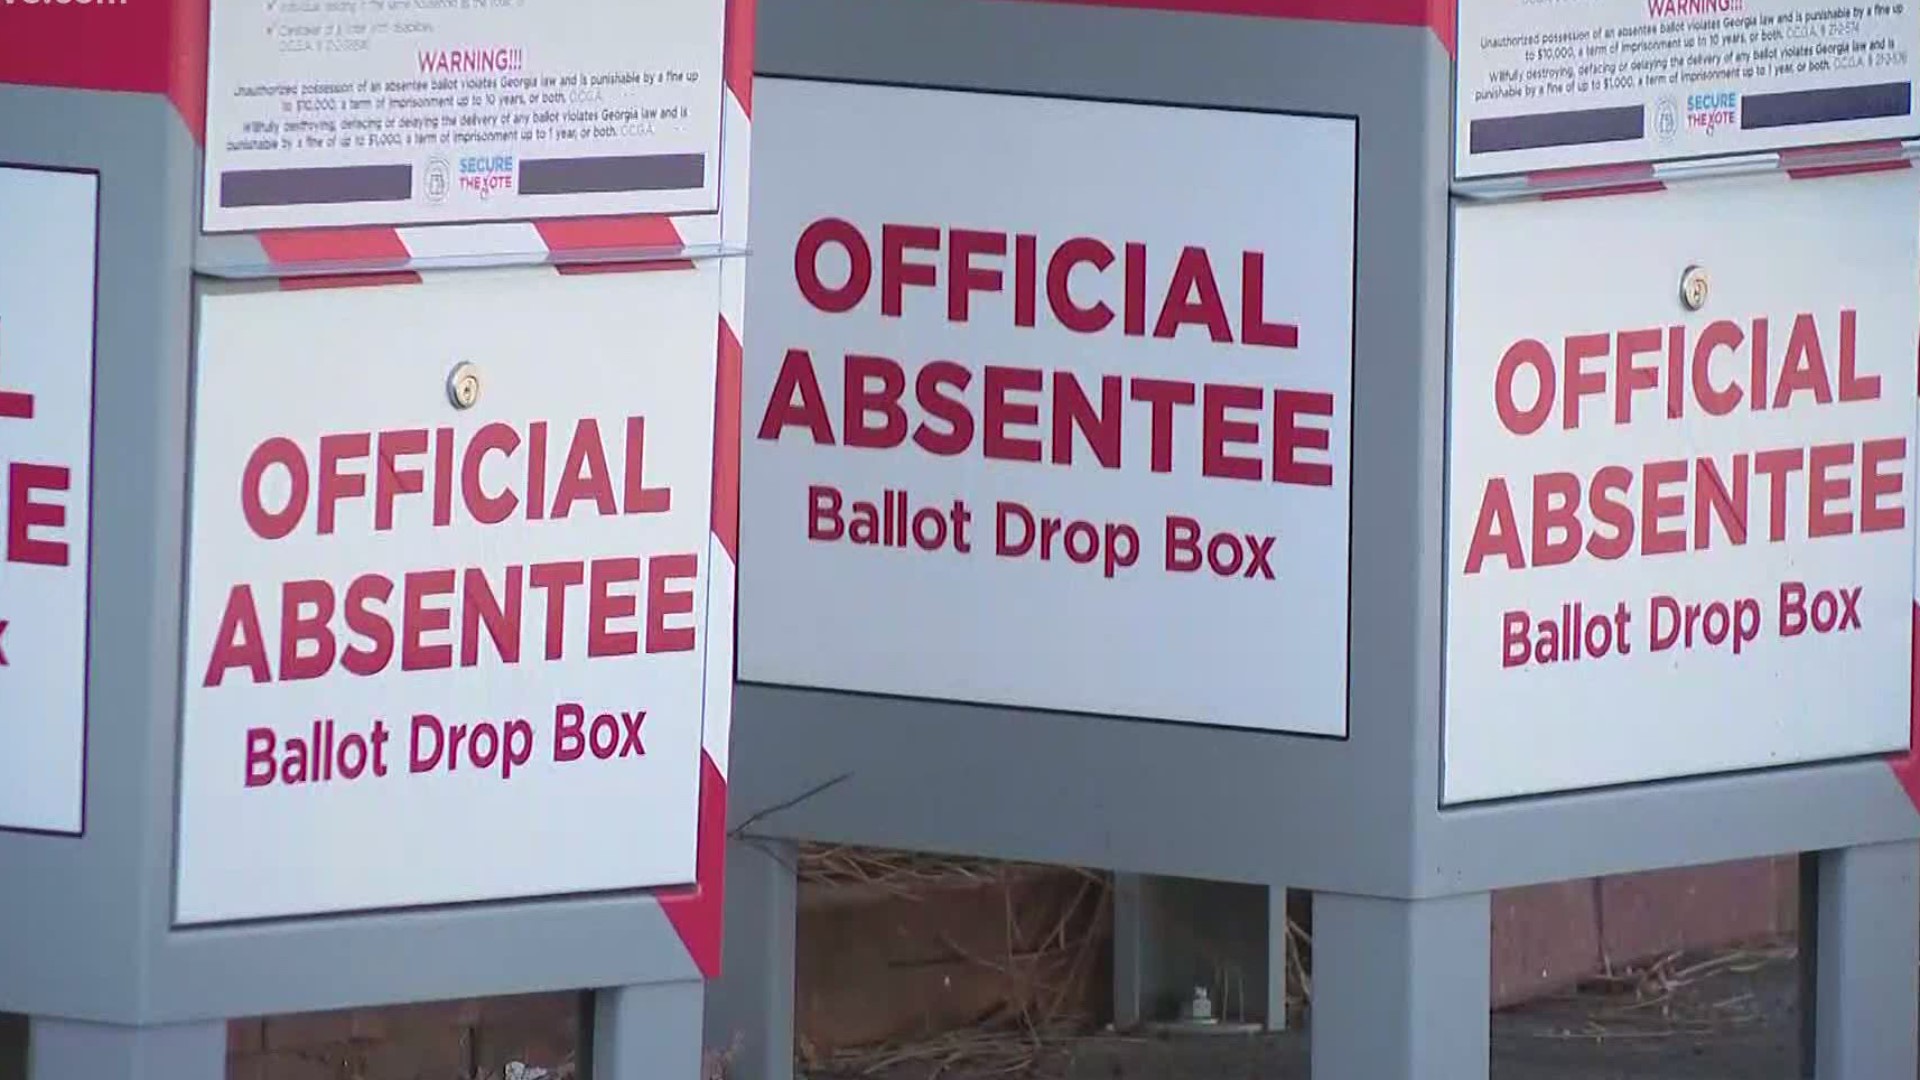 More than 1.3 million people voted by absentee ballot in last November's election.